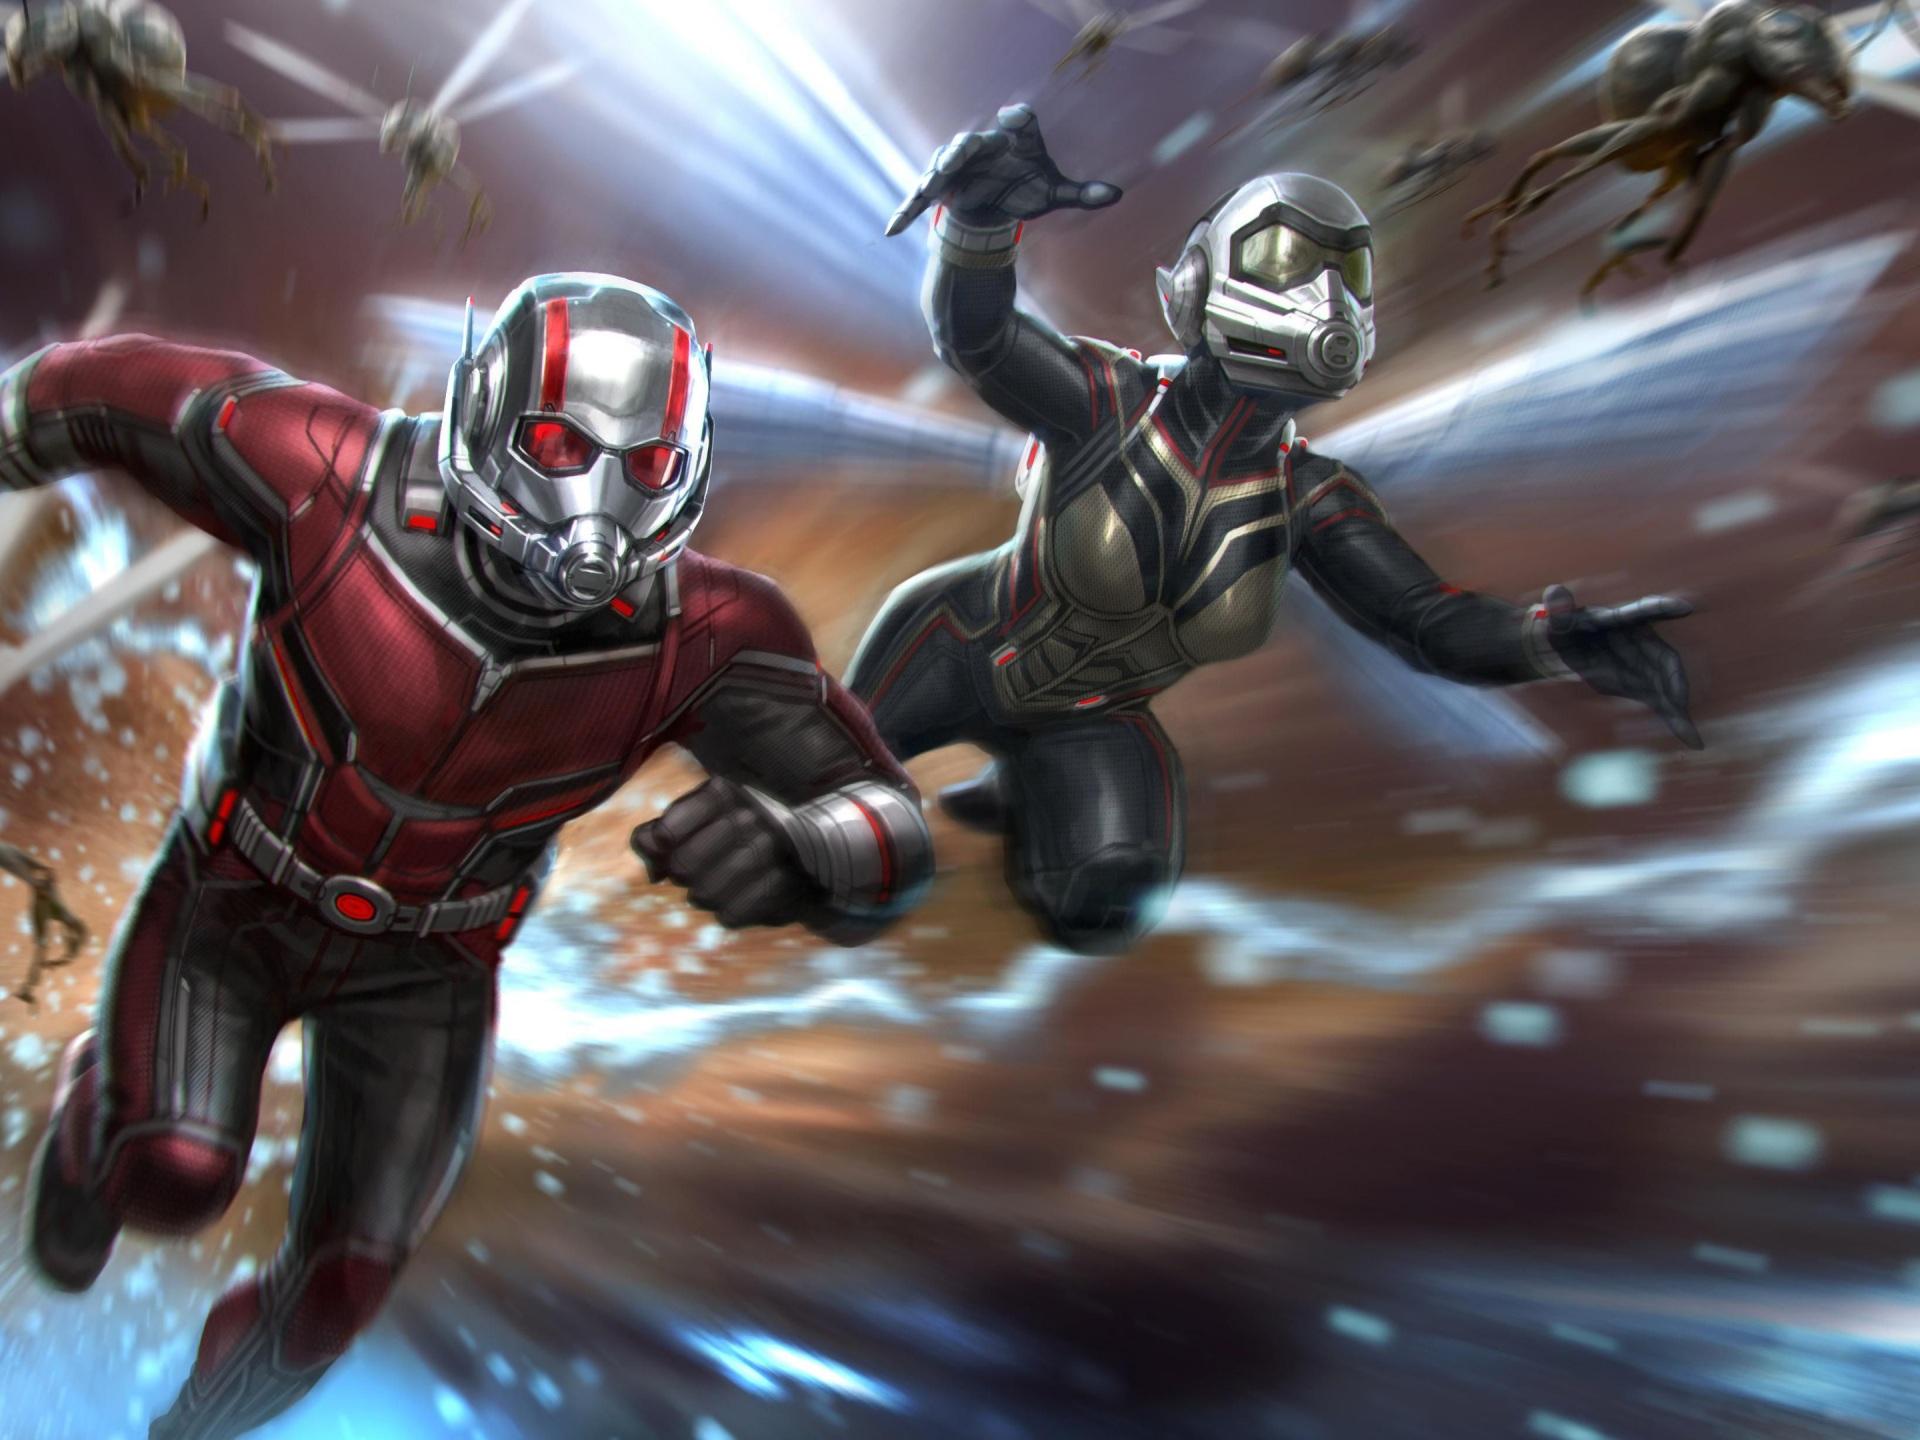 Wallpaper 4k Ant Man And The Wasp Movie Concept Art 2018 Movies